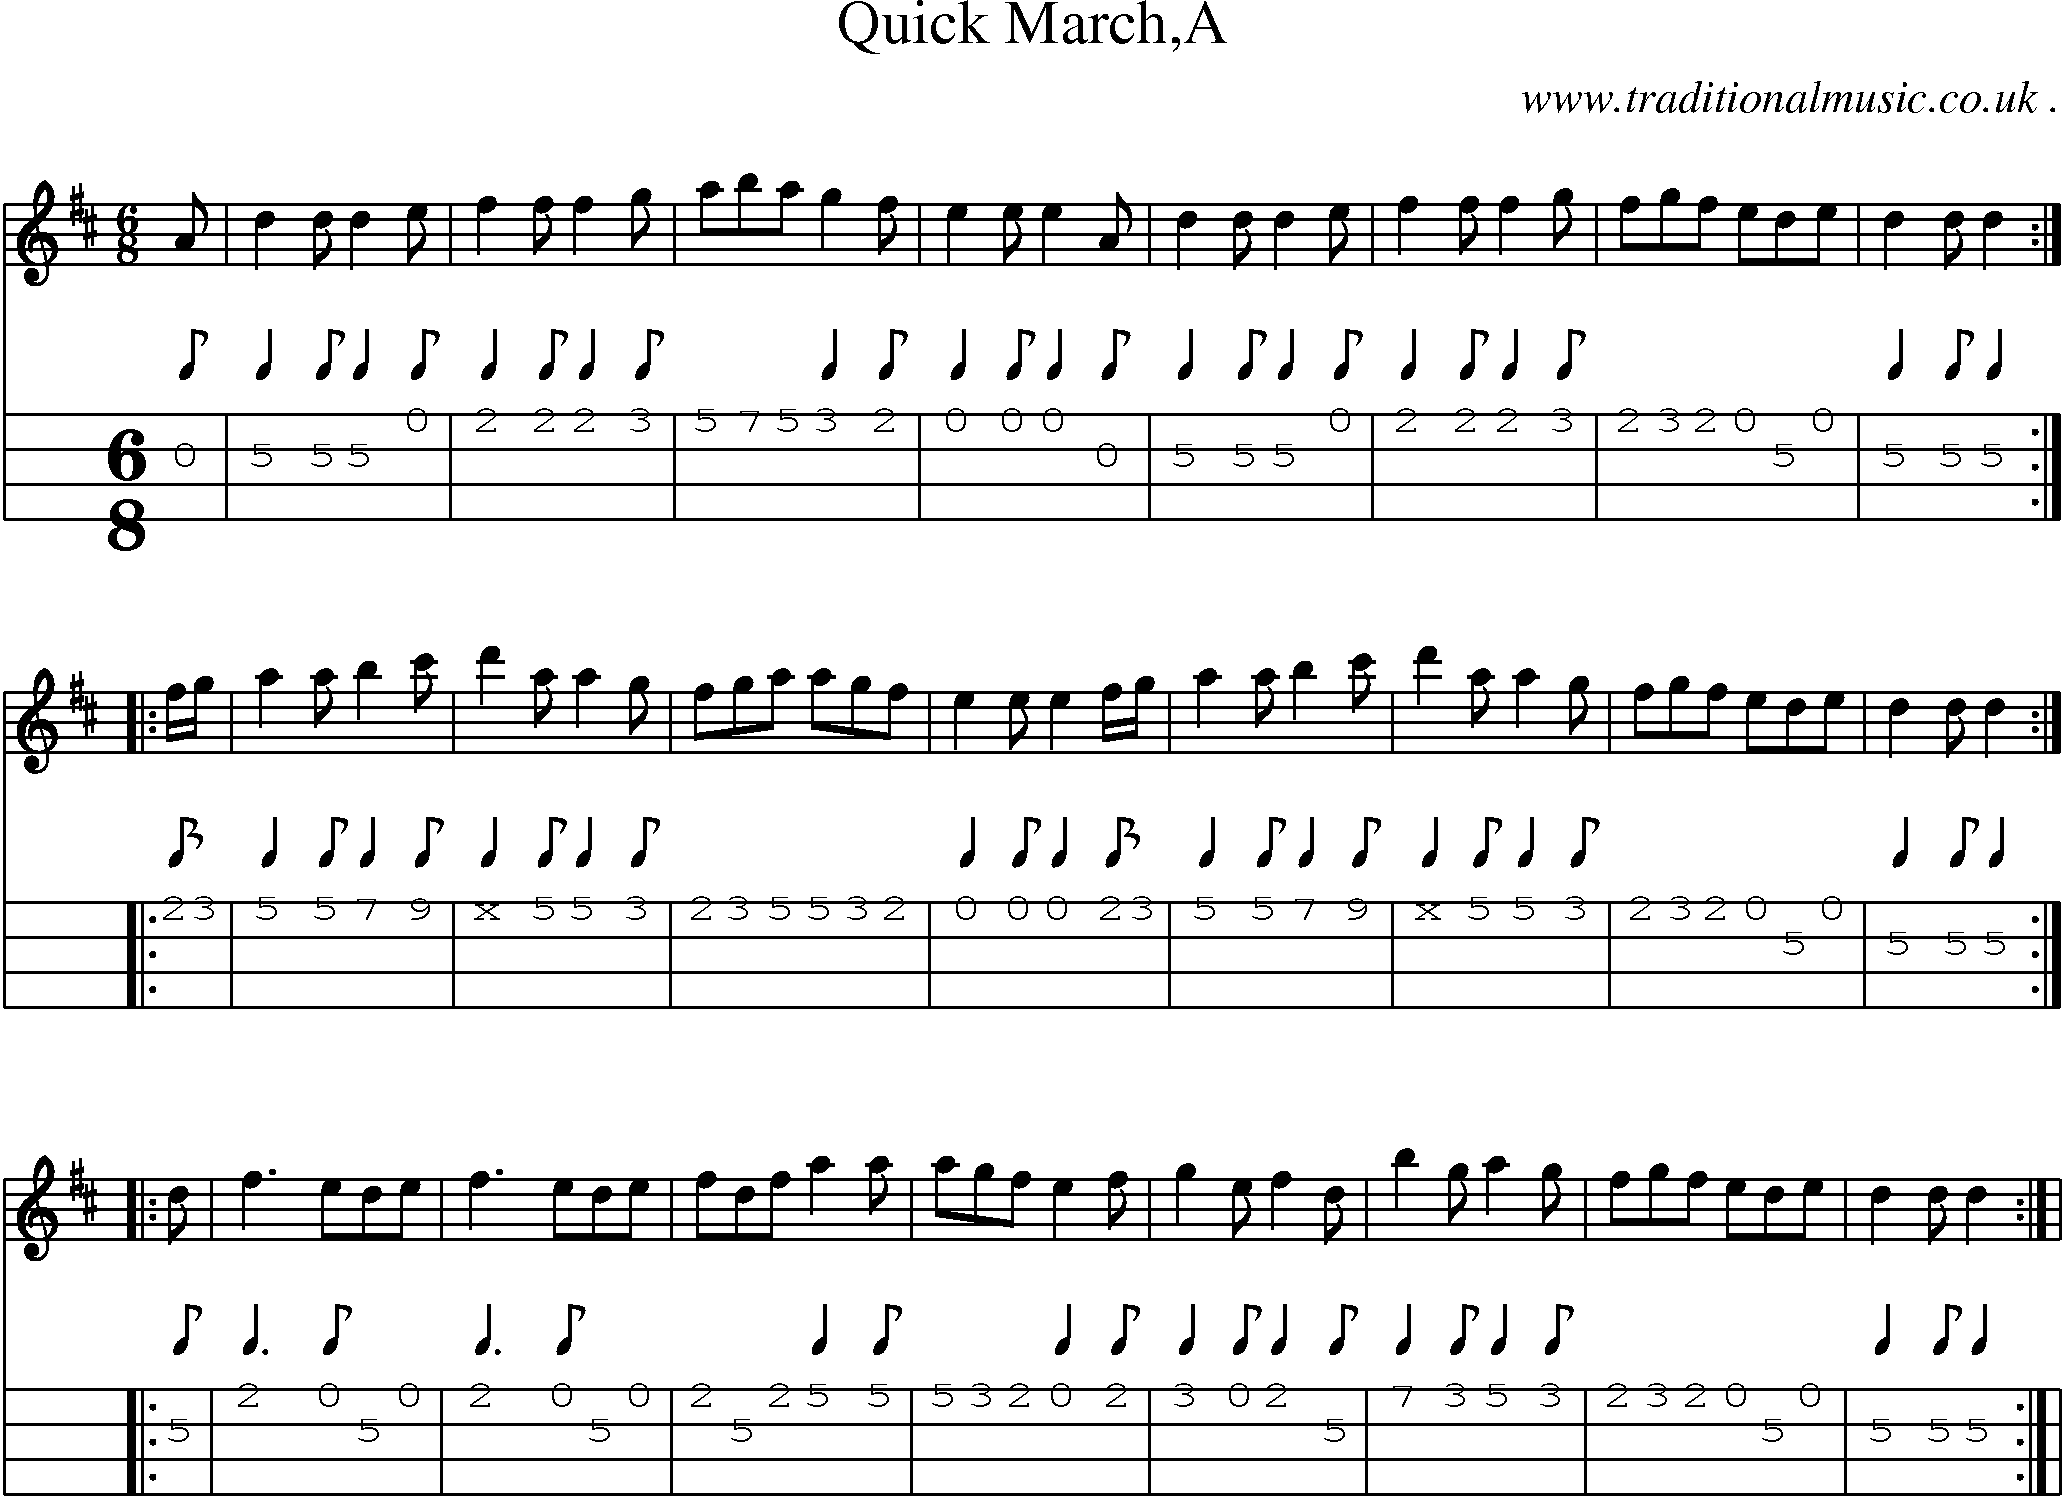 Sheet-Music and Mandolin Tabs for Quick Marcha